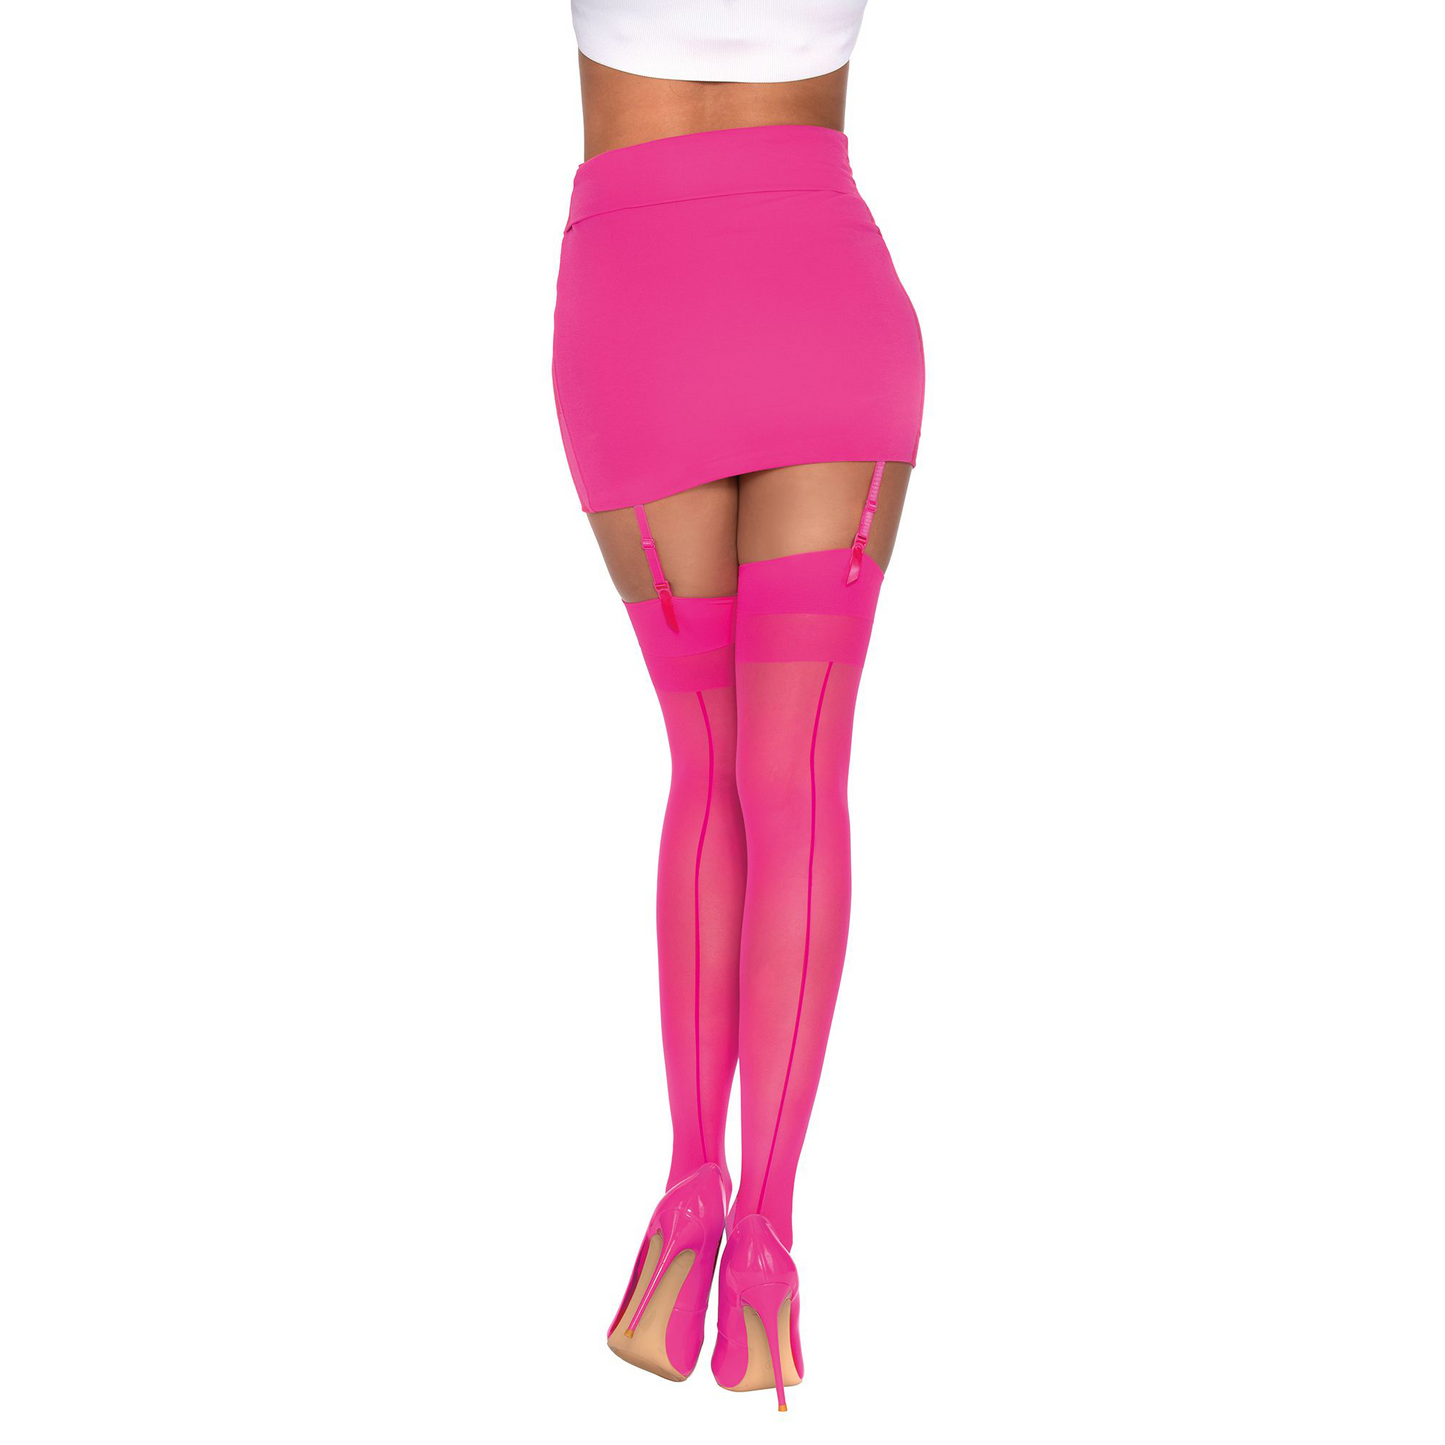 Sheer Thigh Highs - One Size - Hot Pink